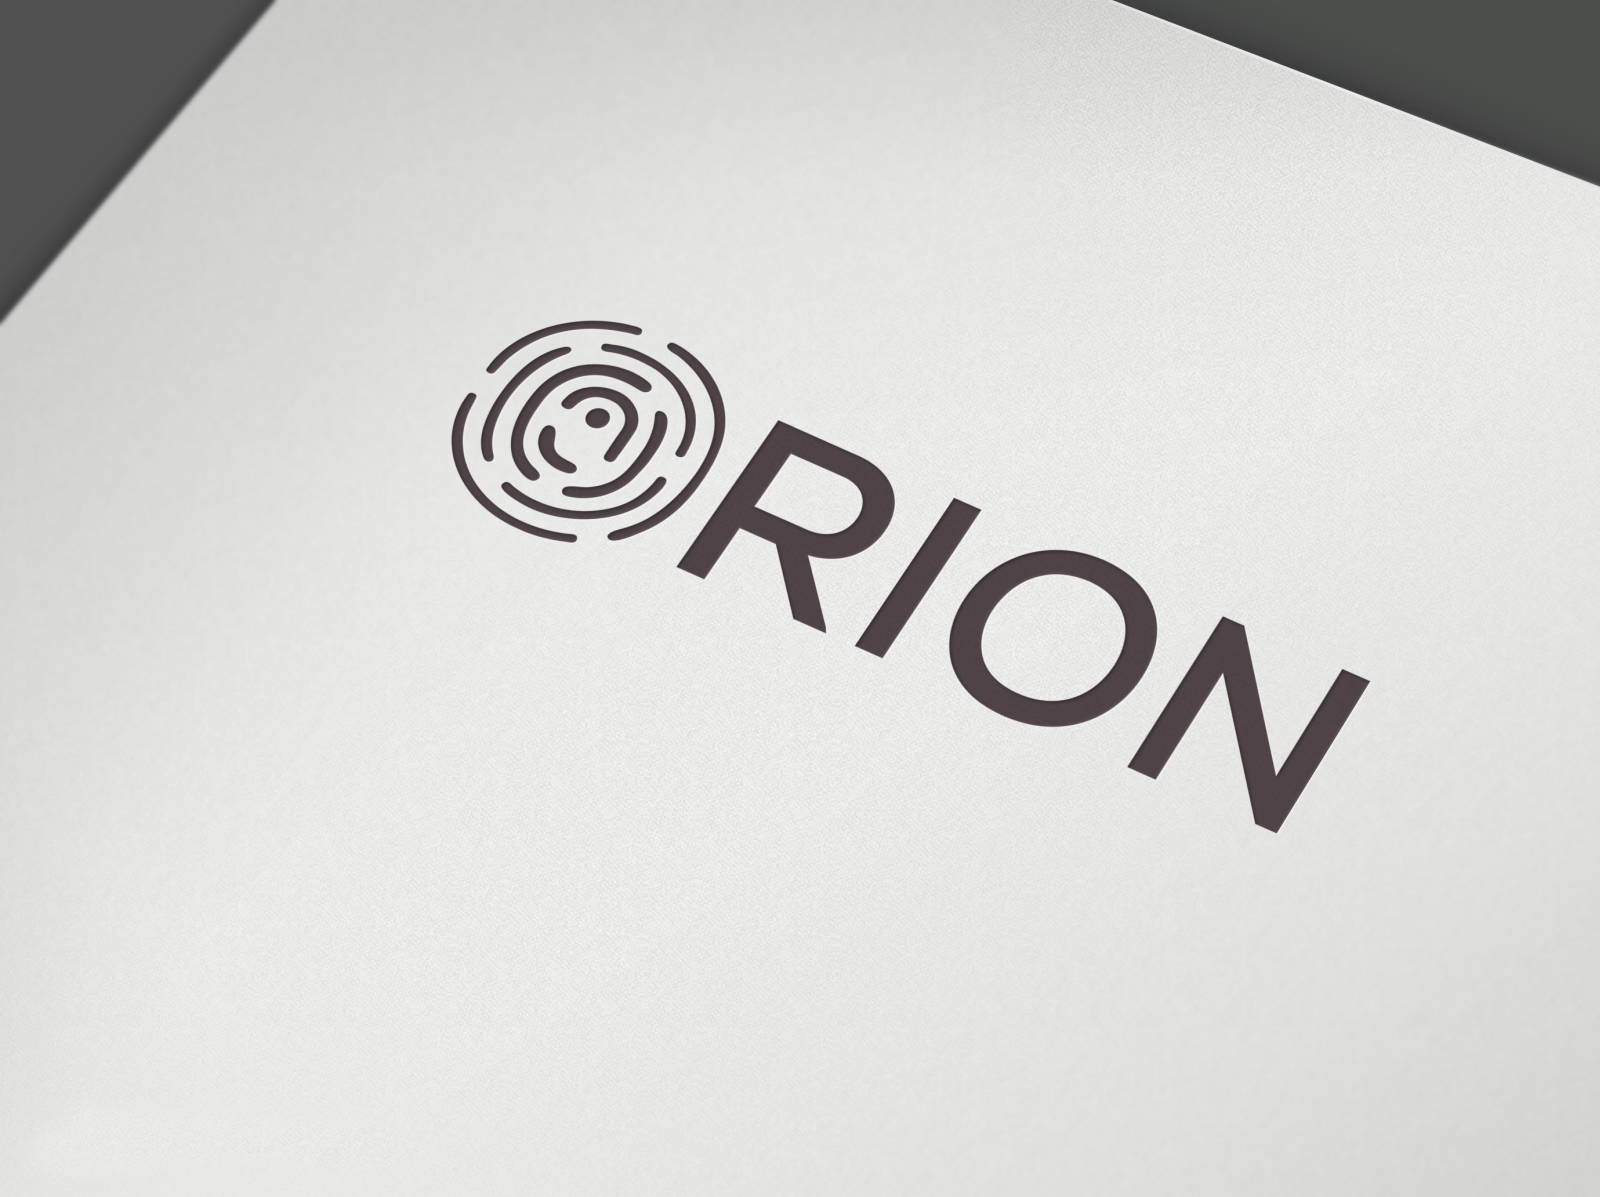 ORION logo design by Robin Ahmed on Dribbble